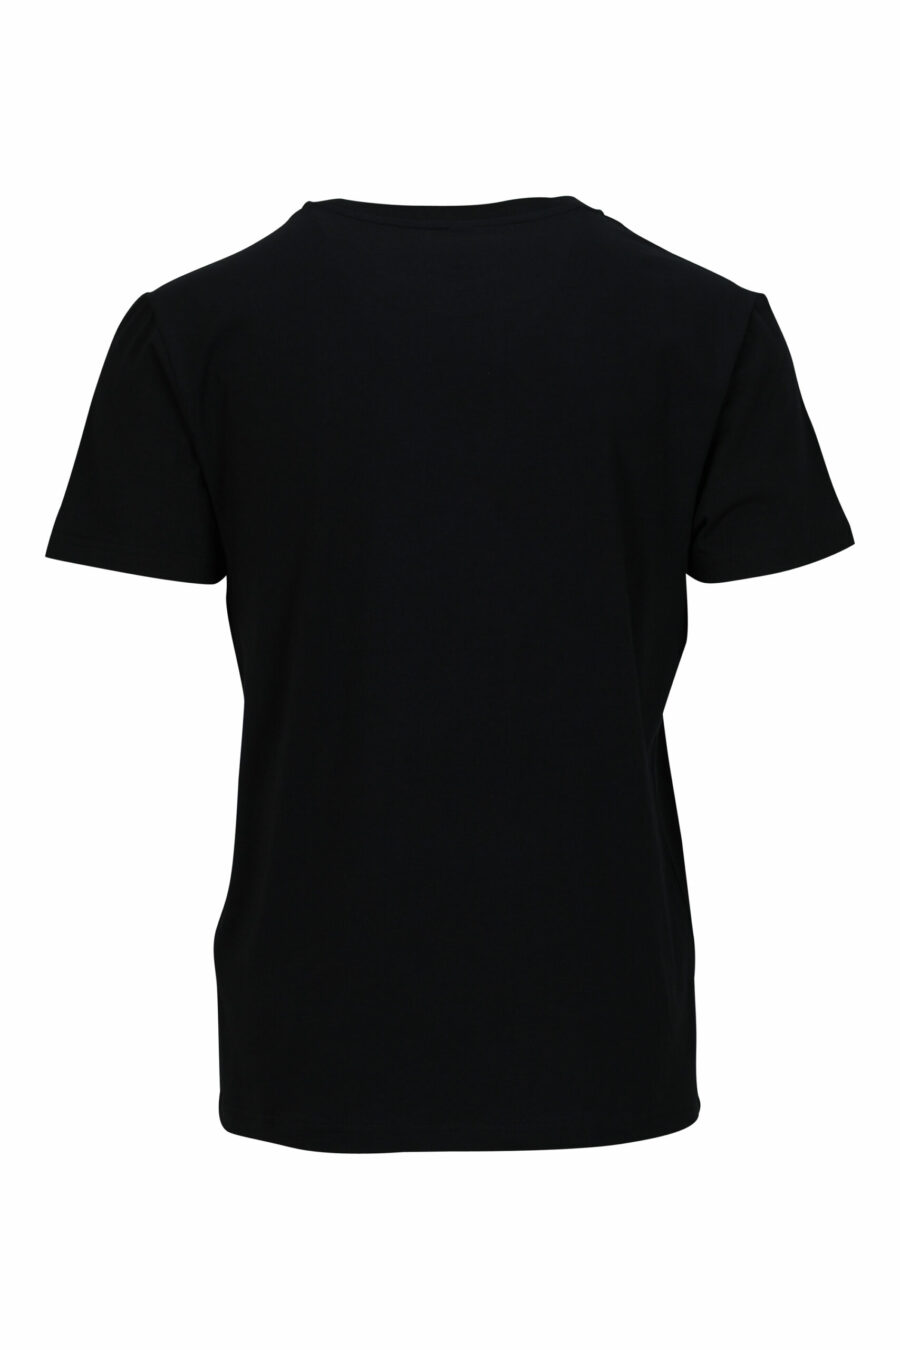 Black T-shirt with minilogue "swim" - 667113673530 1 scaled